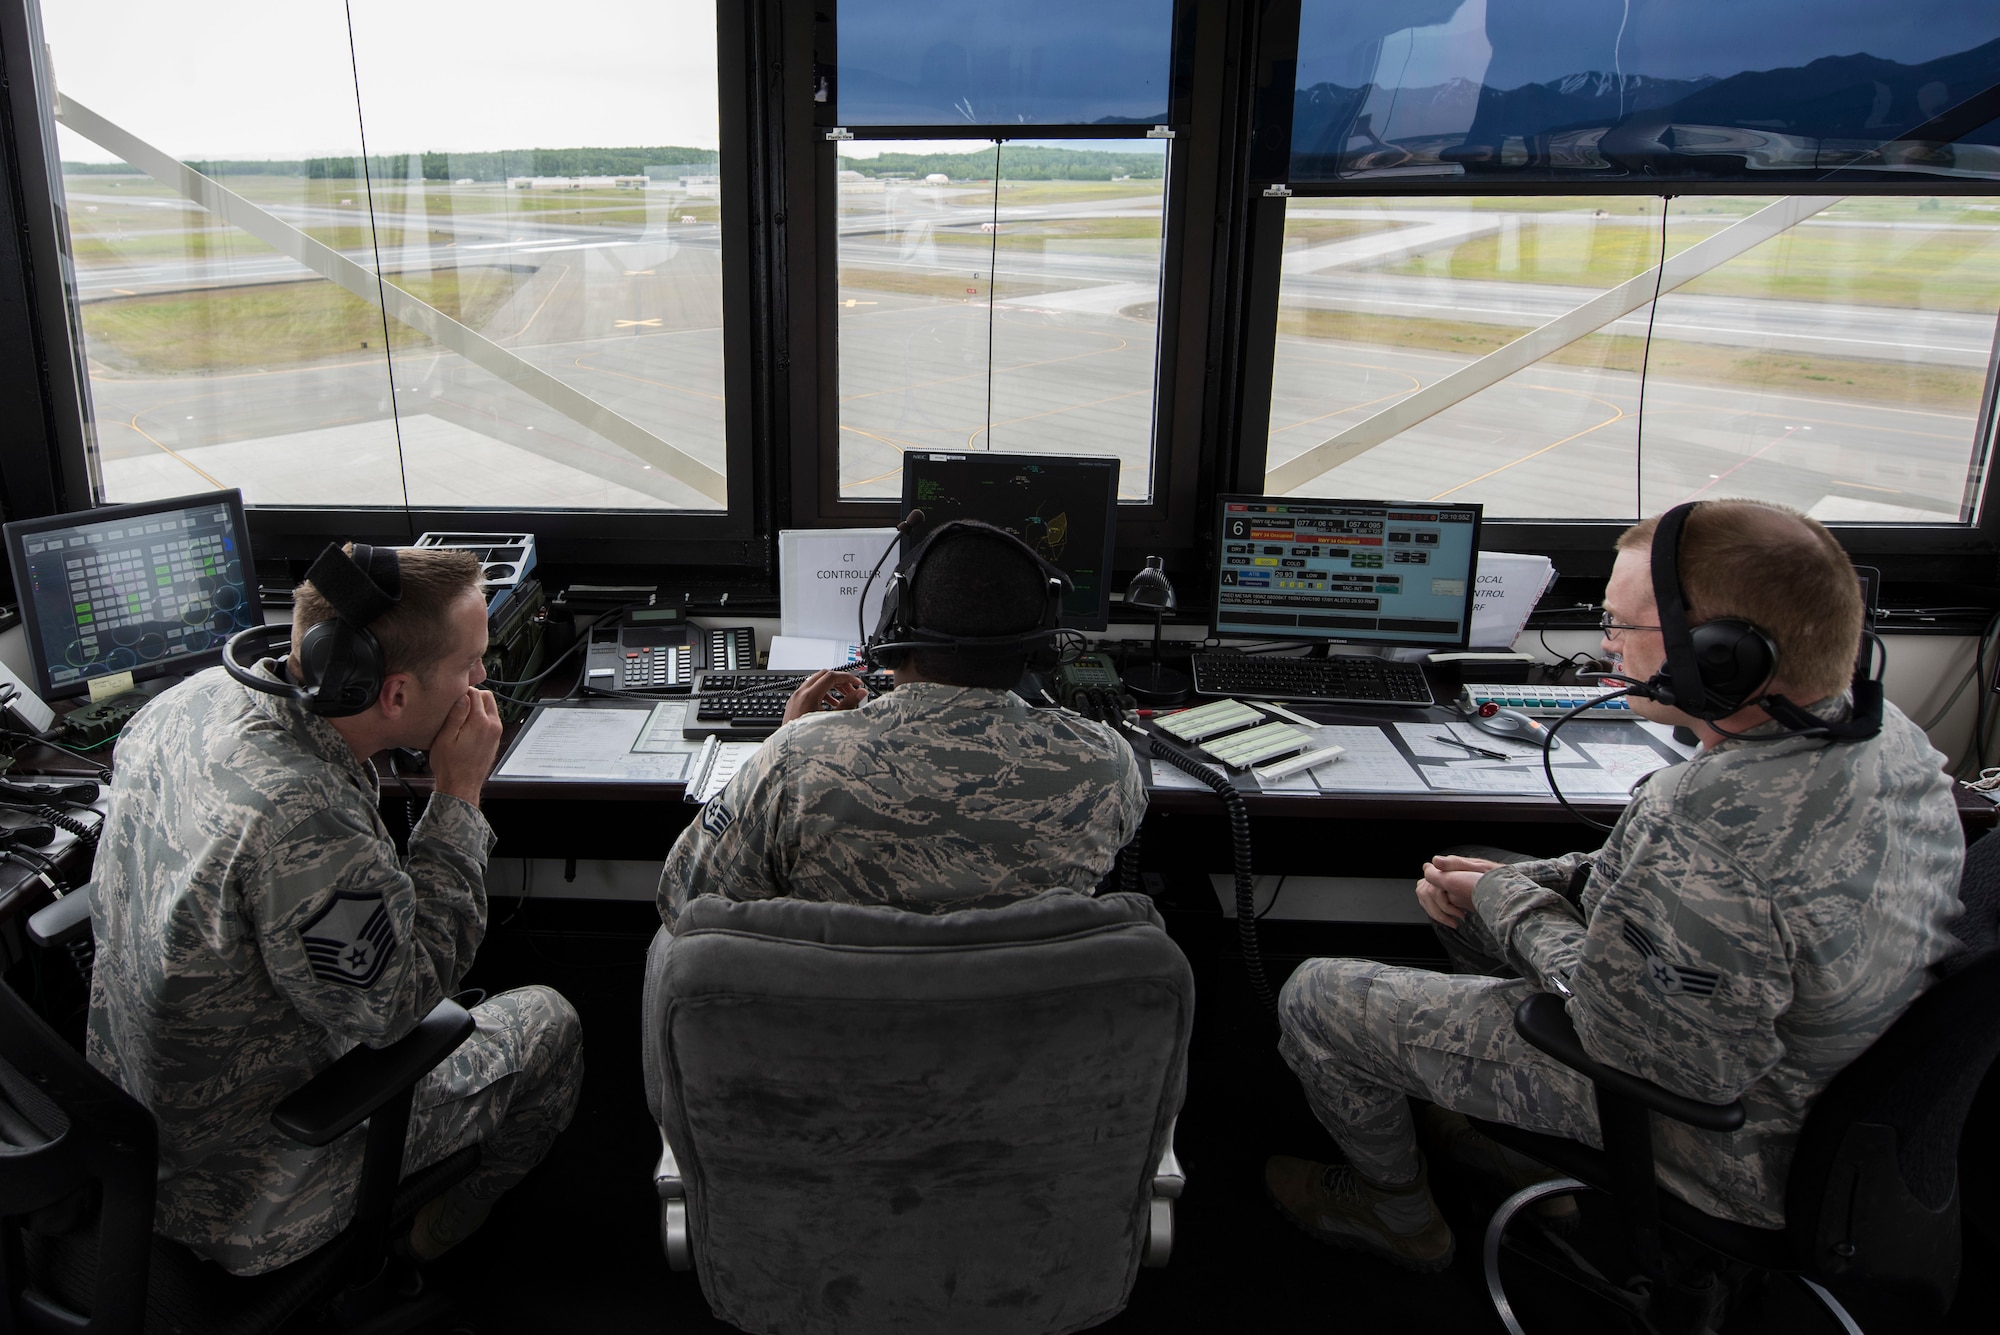 Air Traffic Control Airmen with the 3rd Operations Support Squadron operate out of the Hangar 2 alternate tower on Joint Base Elmendorf-Richardson, Alaska, June 15, 2018. Operations took place at Hangar 2 during the construction of the main tower. Construction is scheduled to be completed June 22.